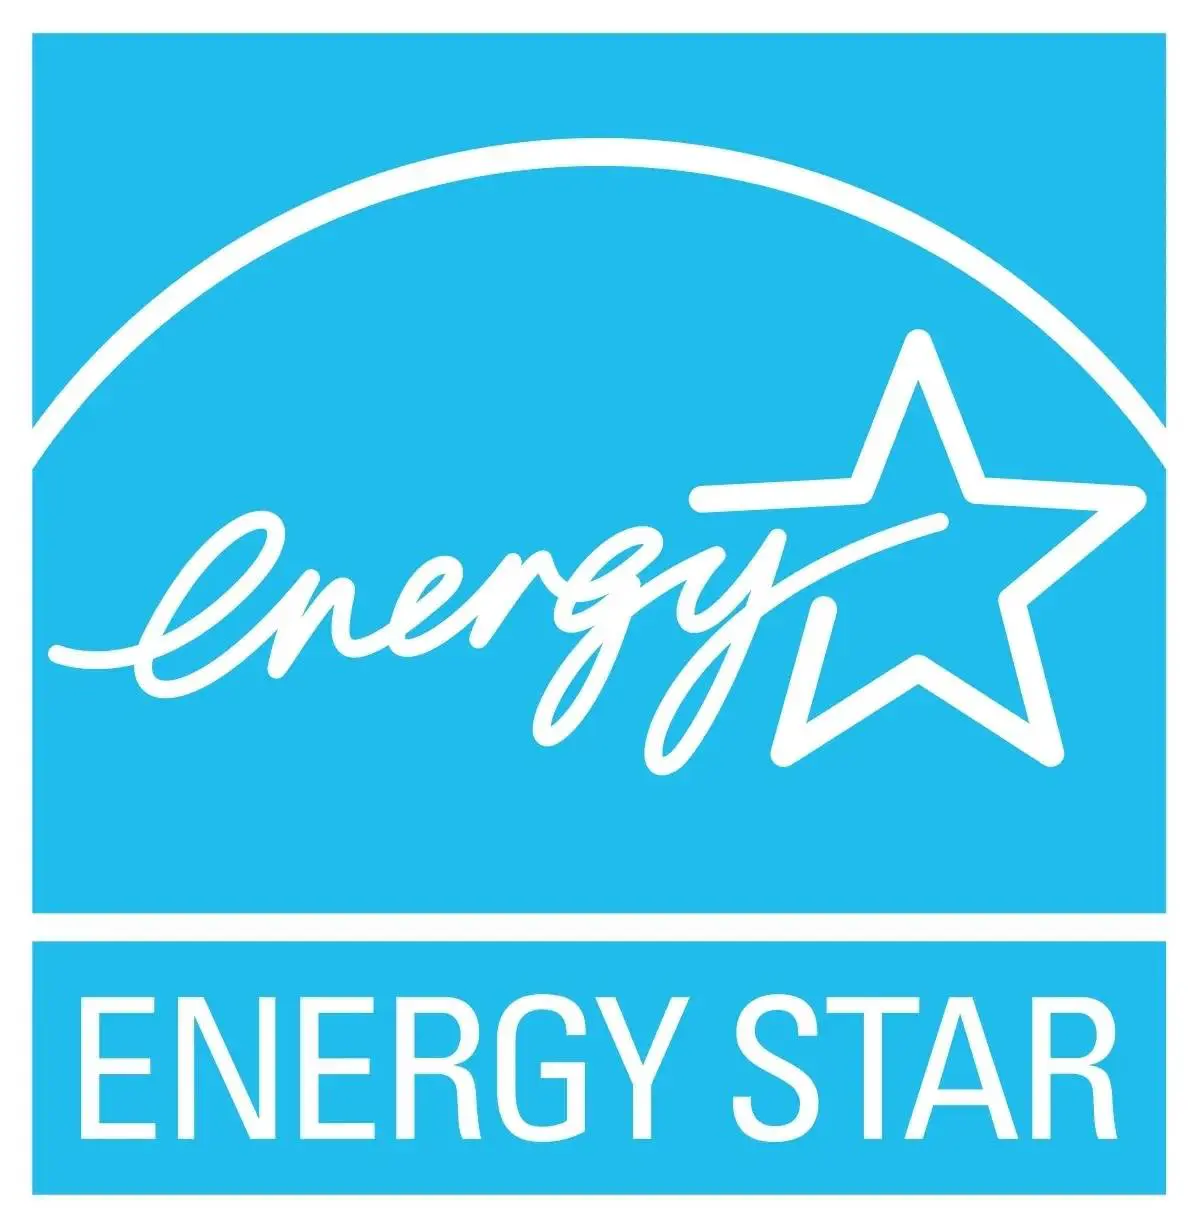 We also strive to be energy efficient through annual energy efficiency certifications for energy star. 